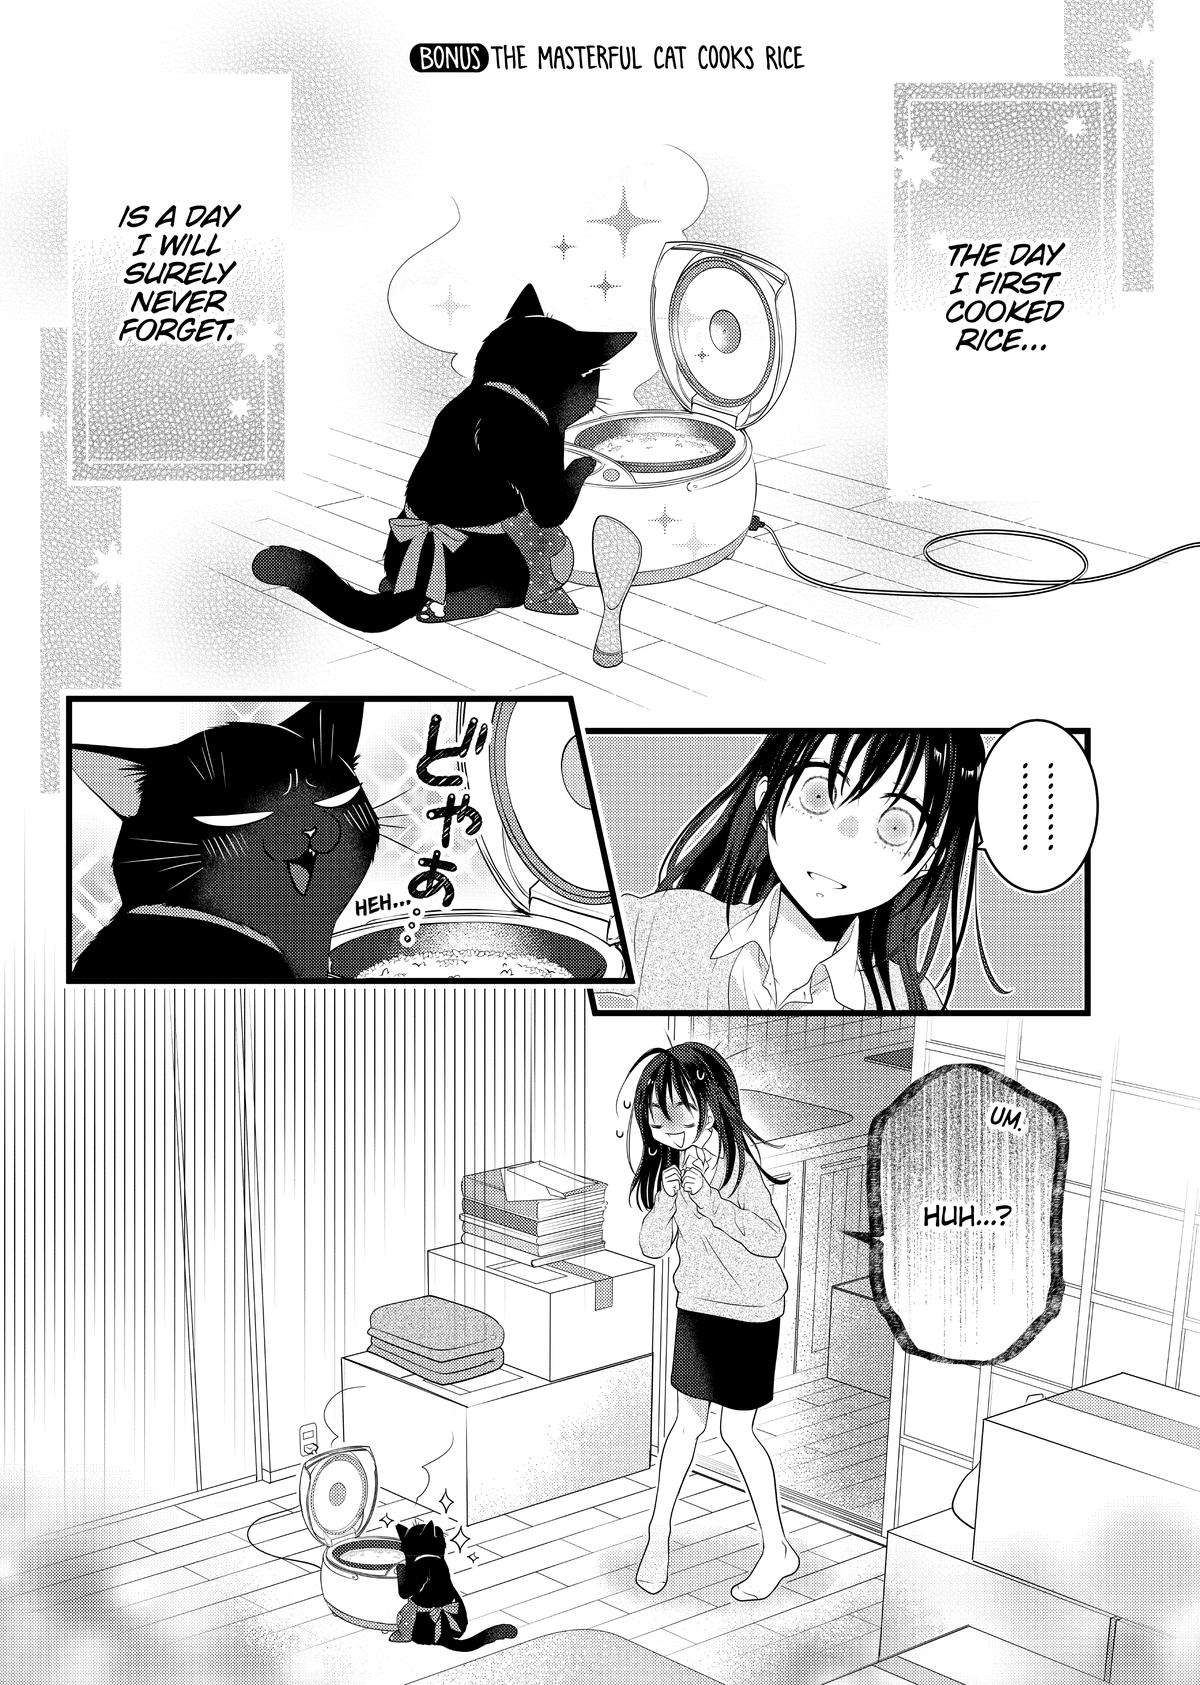 The Masterful Cat is Depressed Again Today - chapter 69.5 - #1